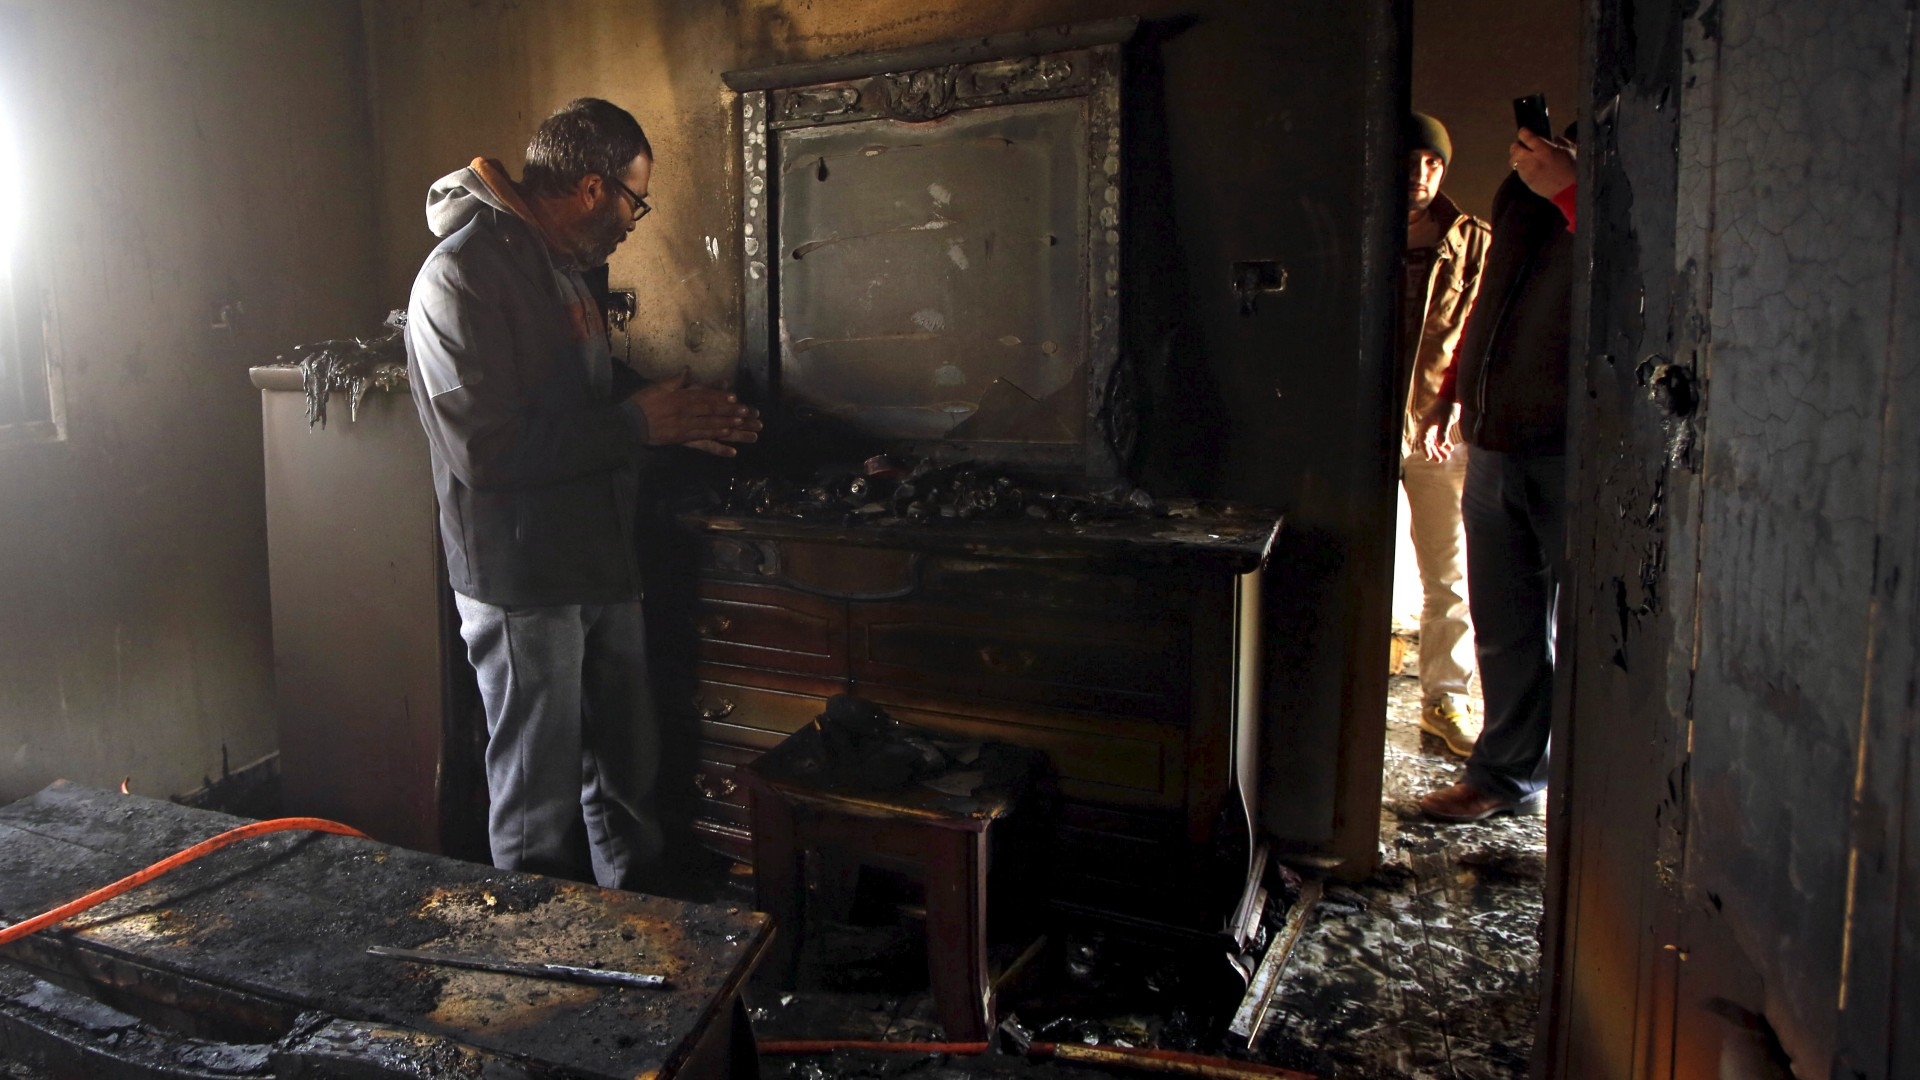 A Palestinian man inspects the damage to the torched house of Ibrahim Dawabsheh, the main witness to an arson attack, in the West Bank village of Duma near Nablus in March 2016